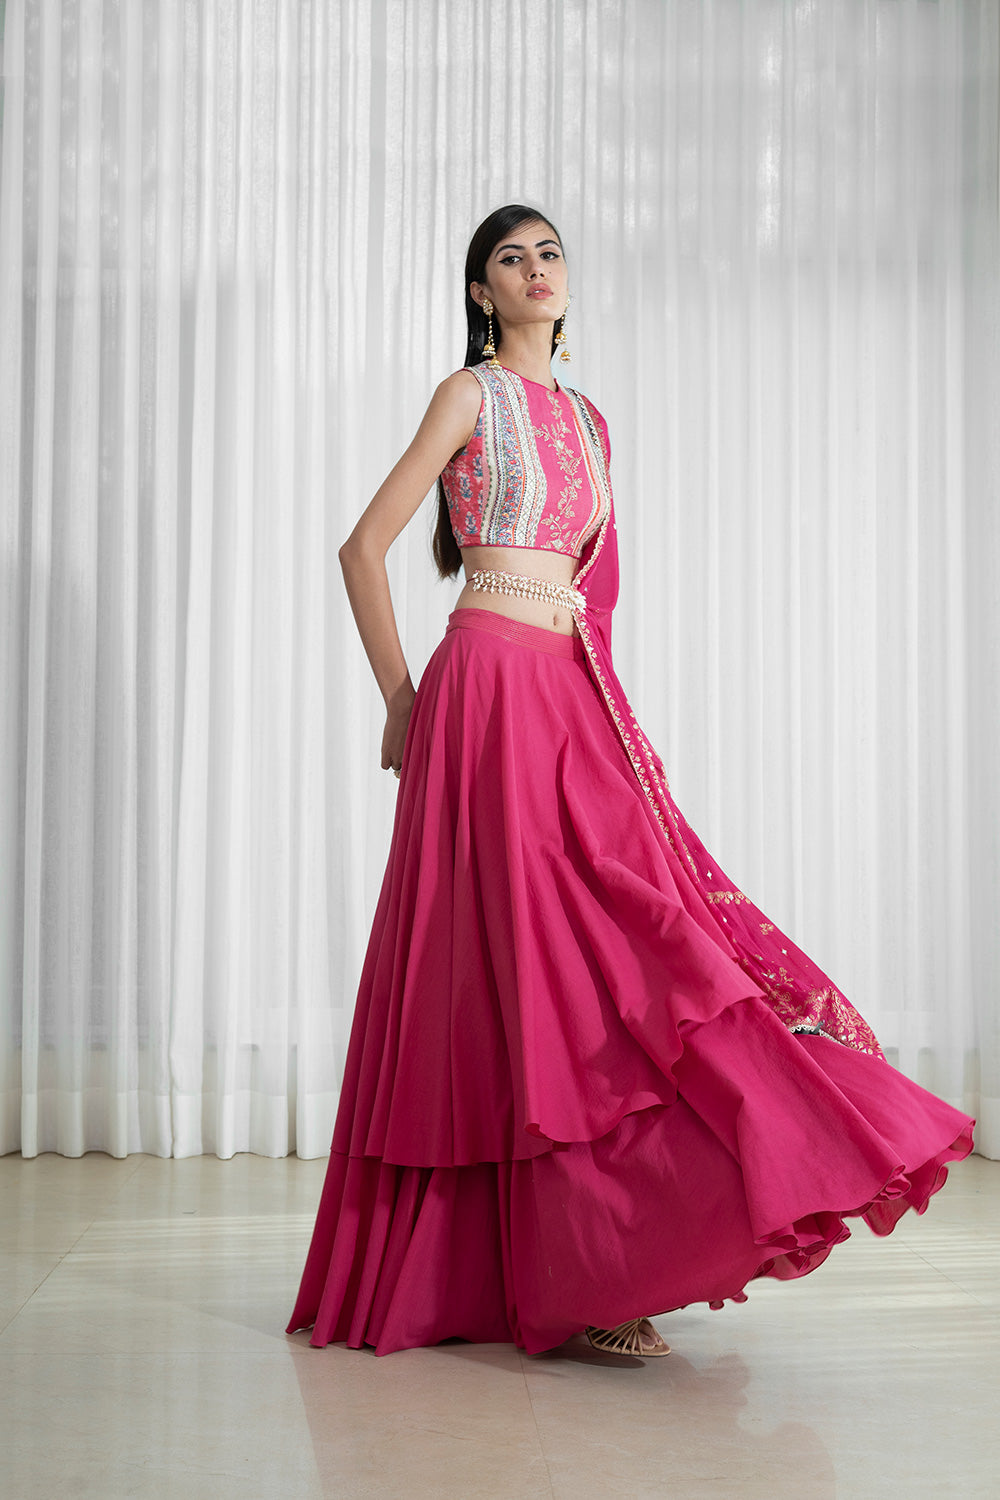 Double Layered Skirt With Blouse And Dupatta